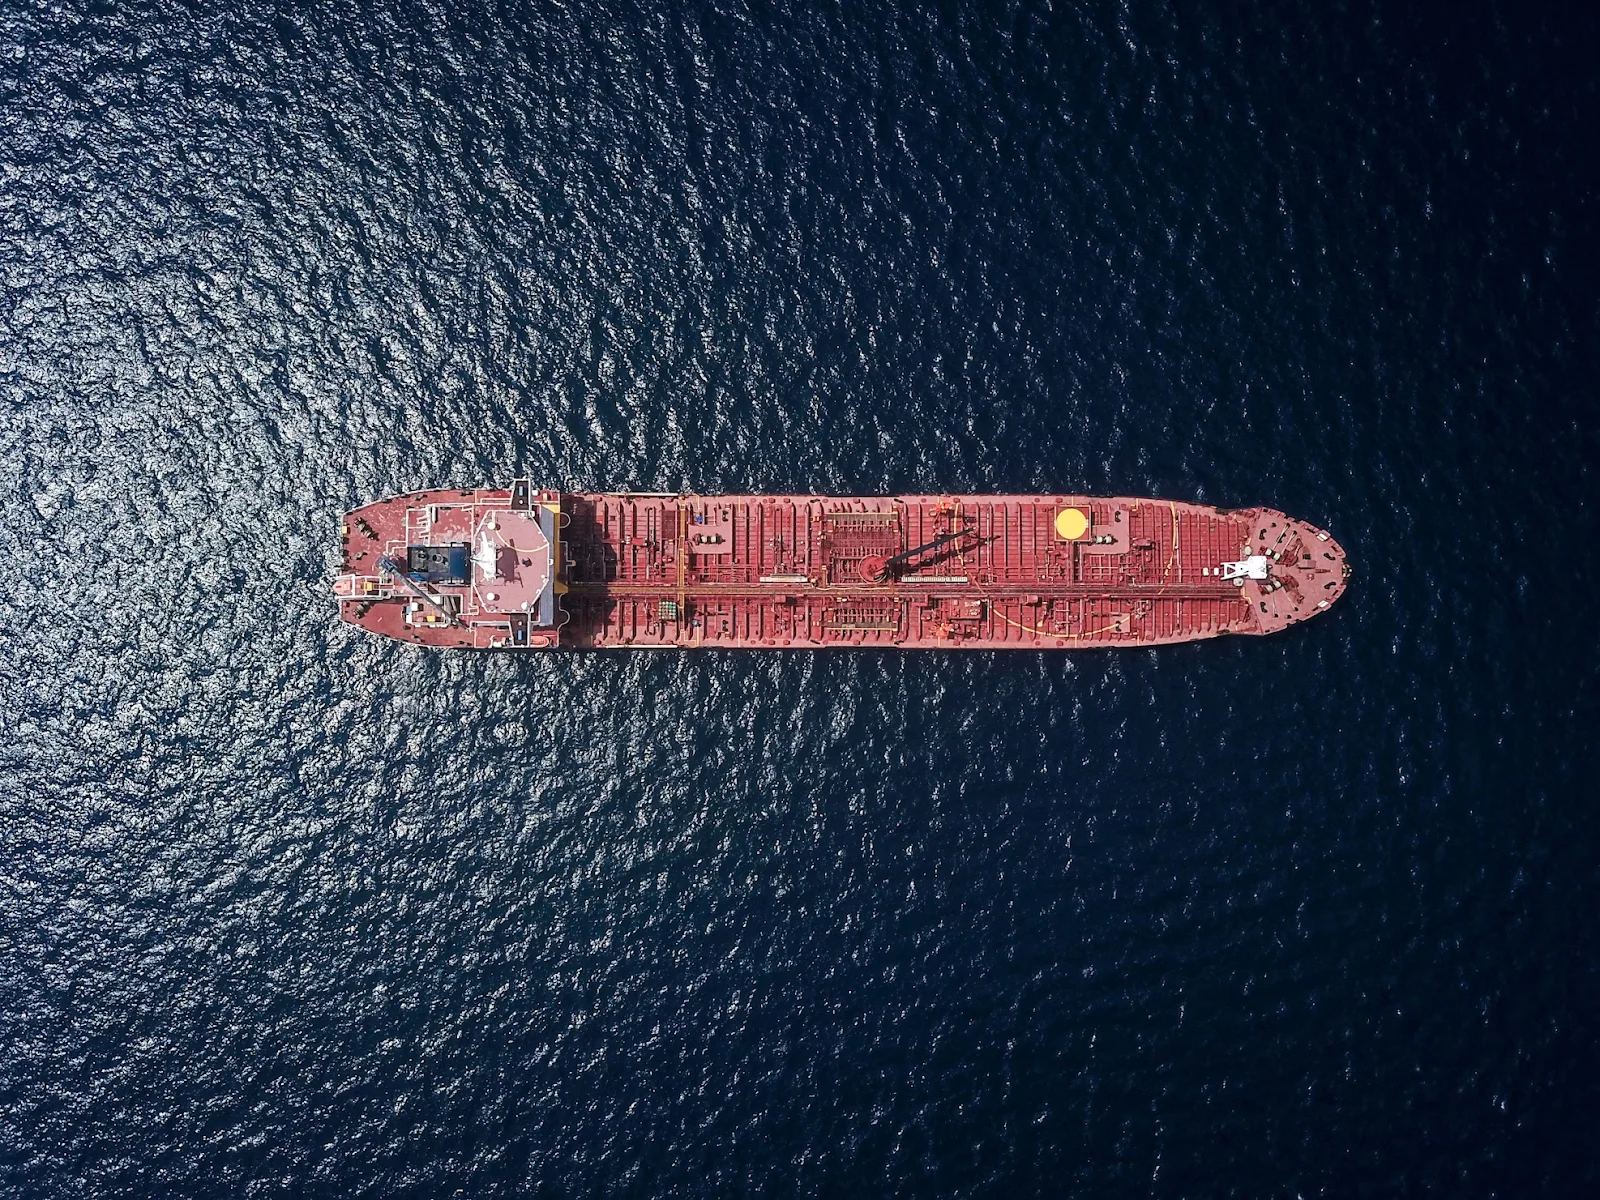 A bird’s eye view of a red sea vessel